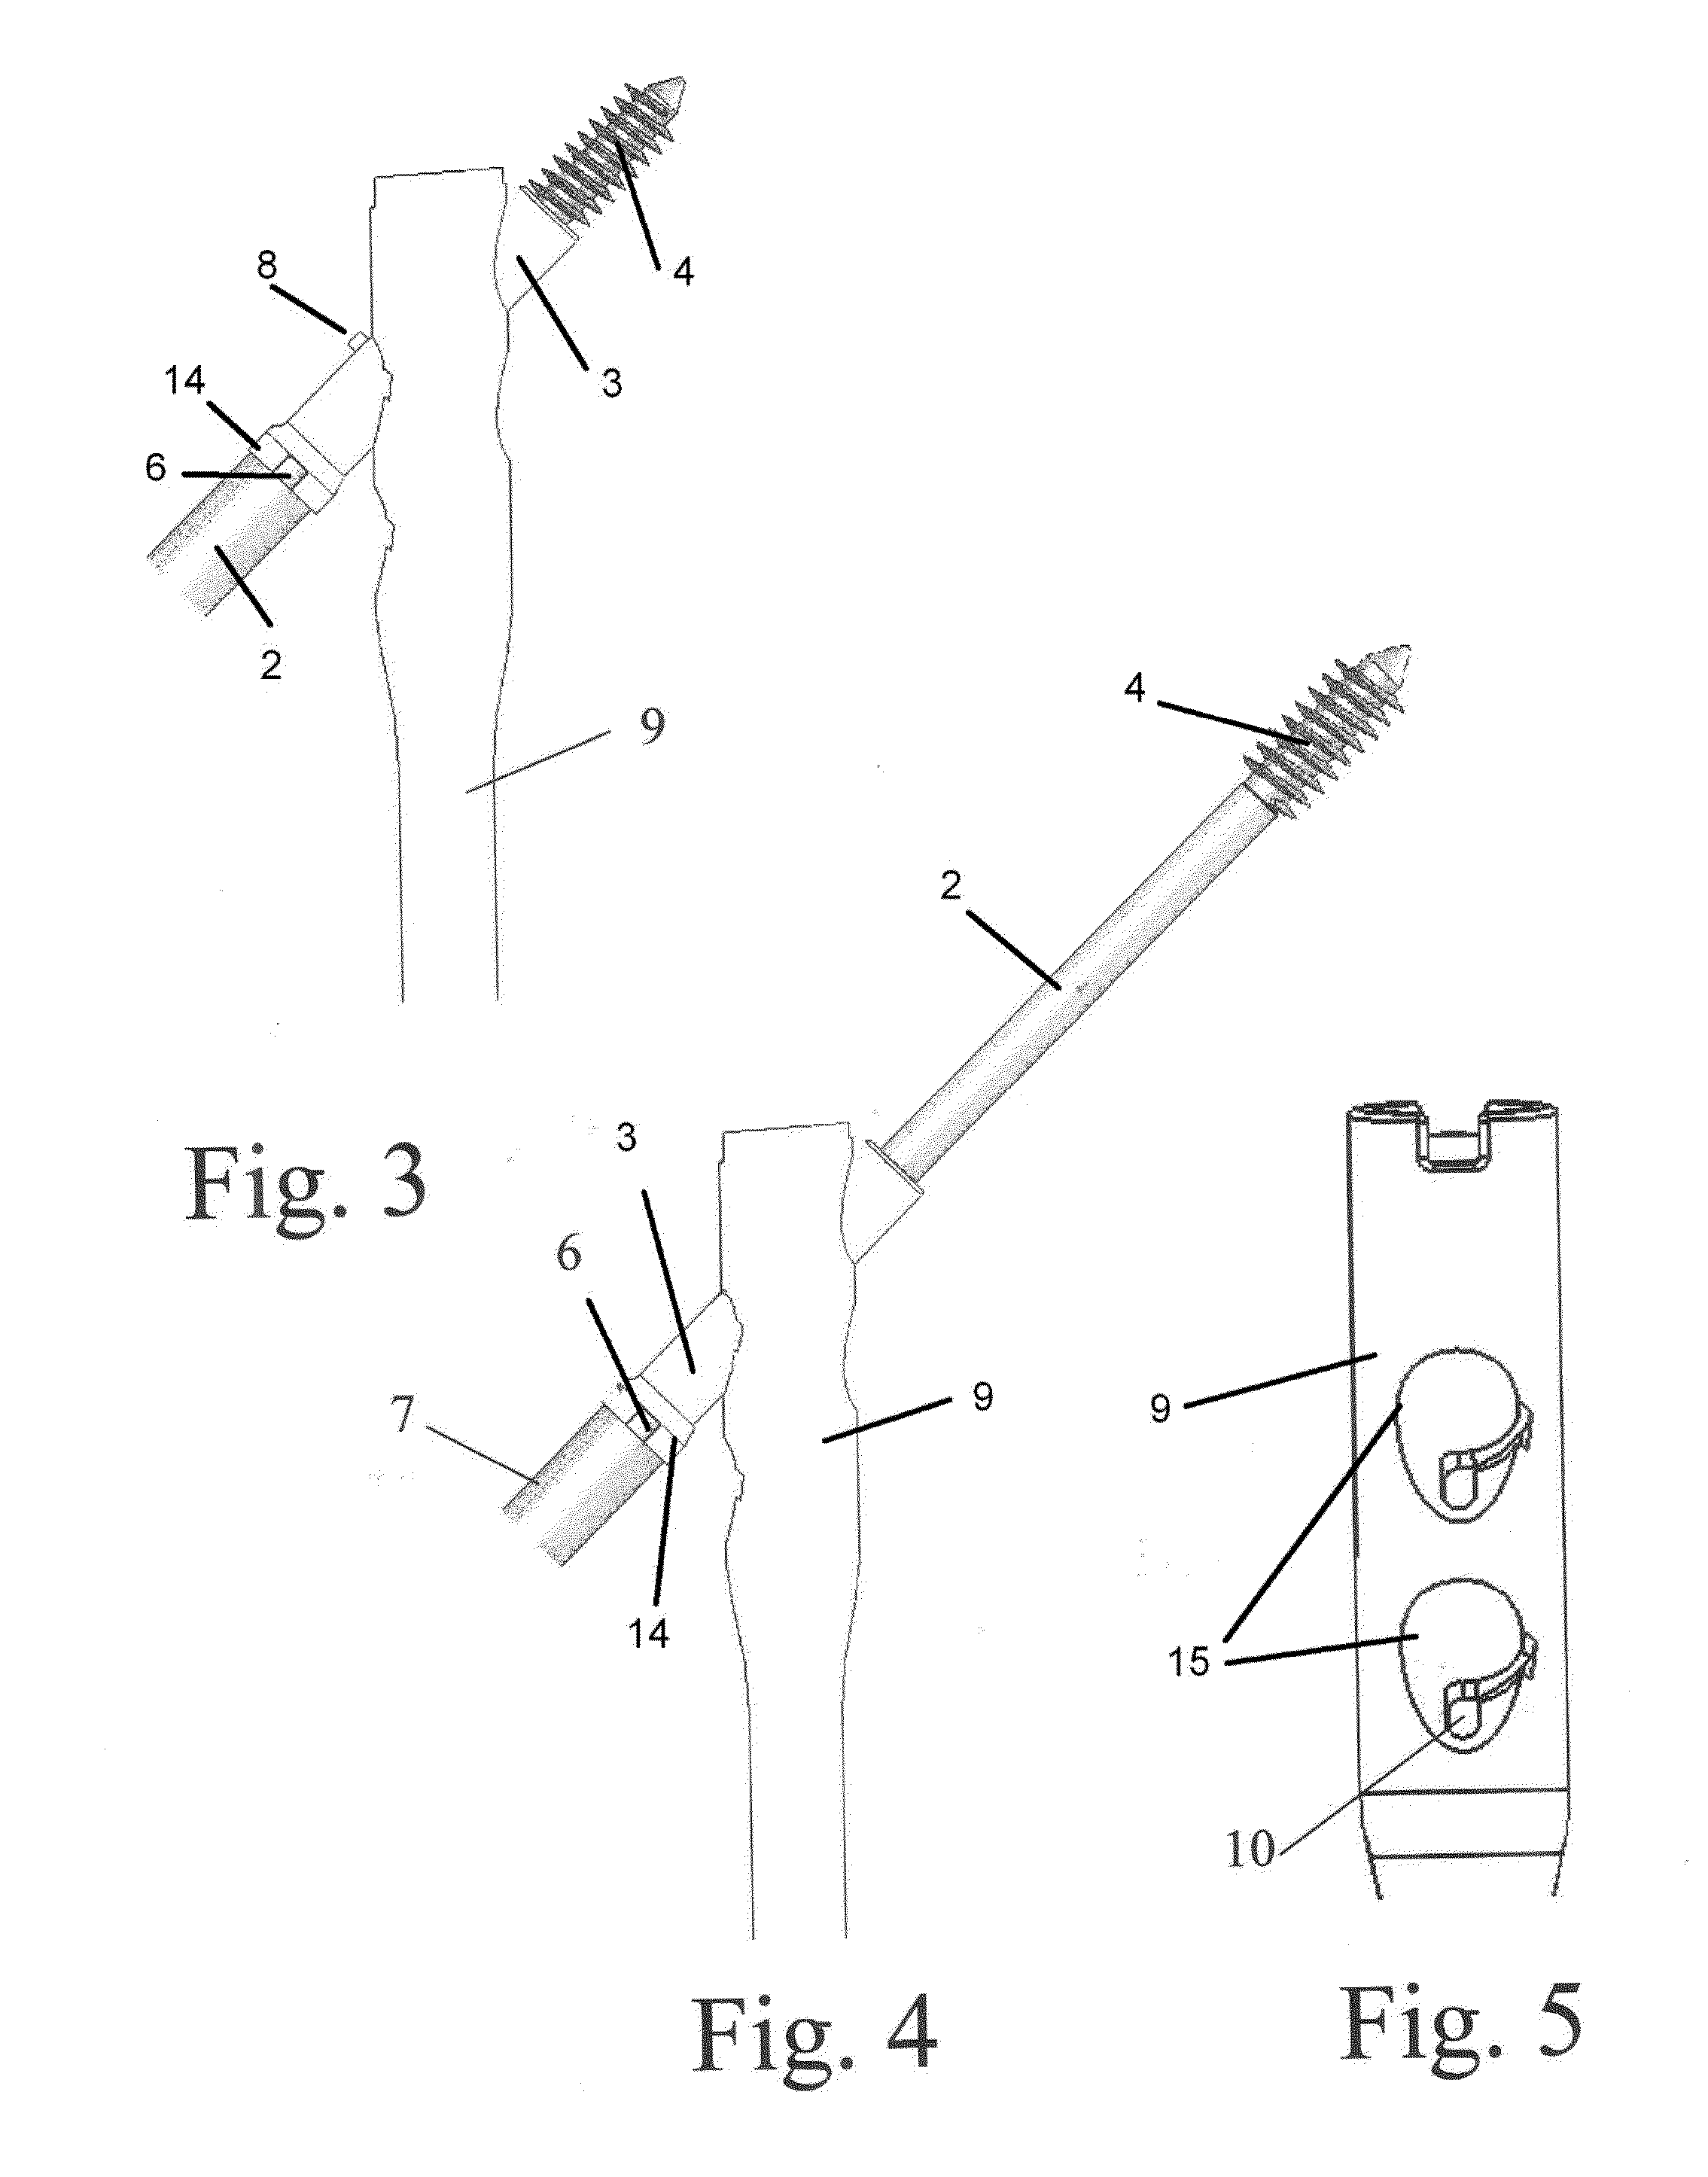 Method for connecting fractured bone